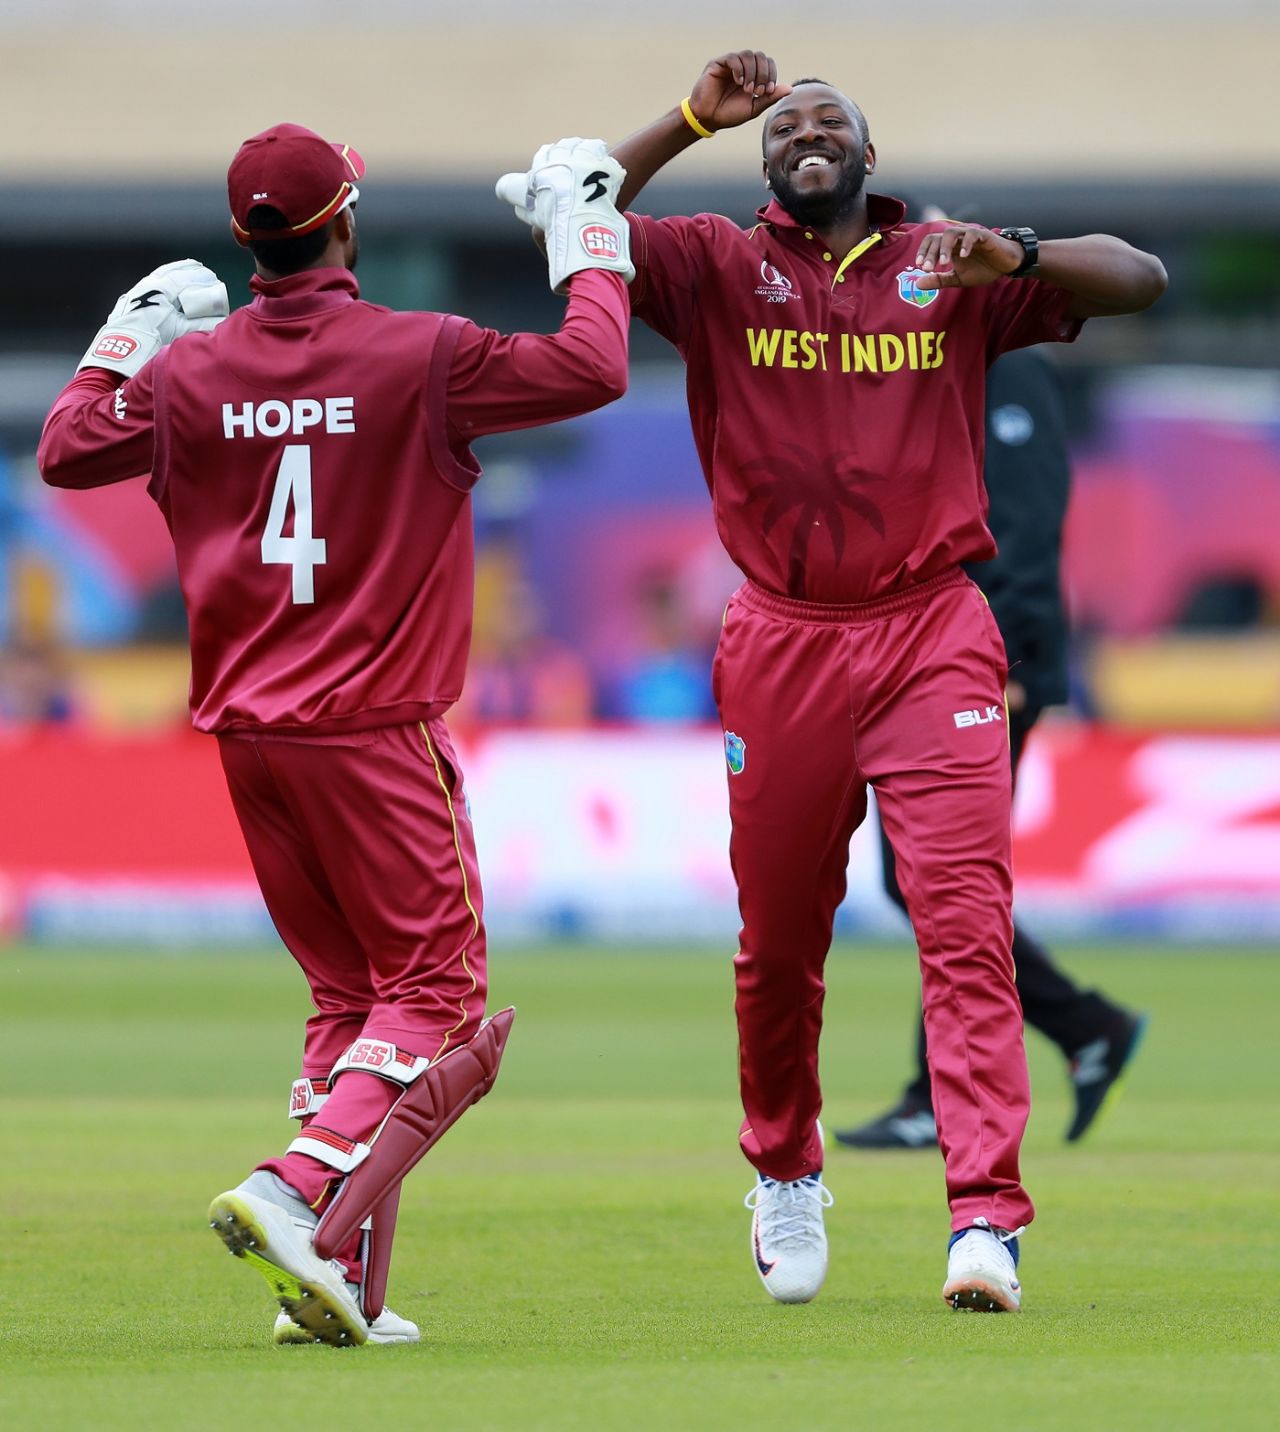 Andre Russell celebrates with Shai Hope, Australia v West Indies, World Cup 2019, Trent Bridge, June 6, 2019